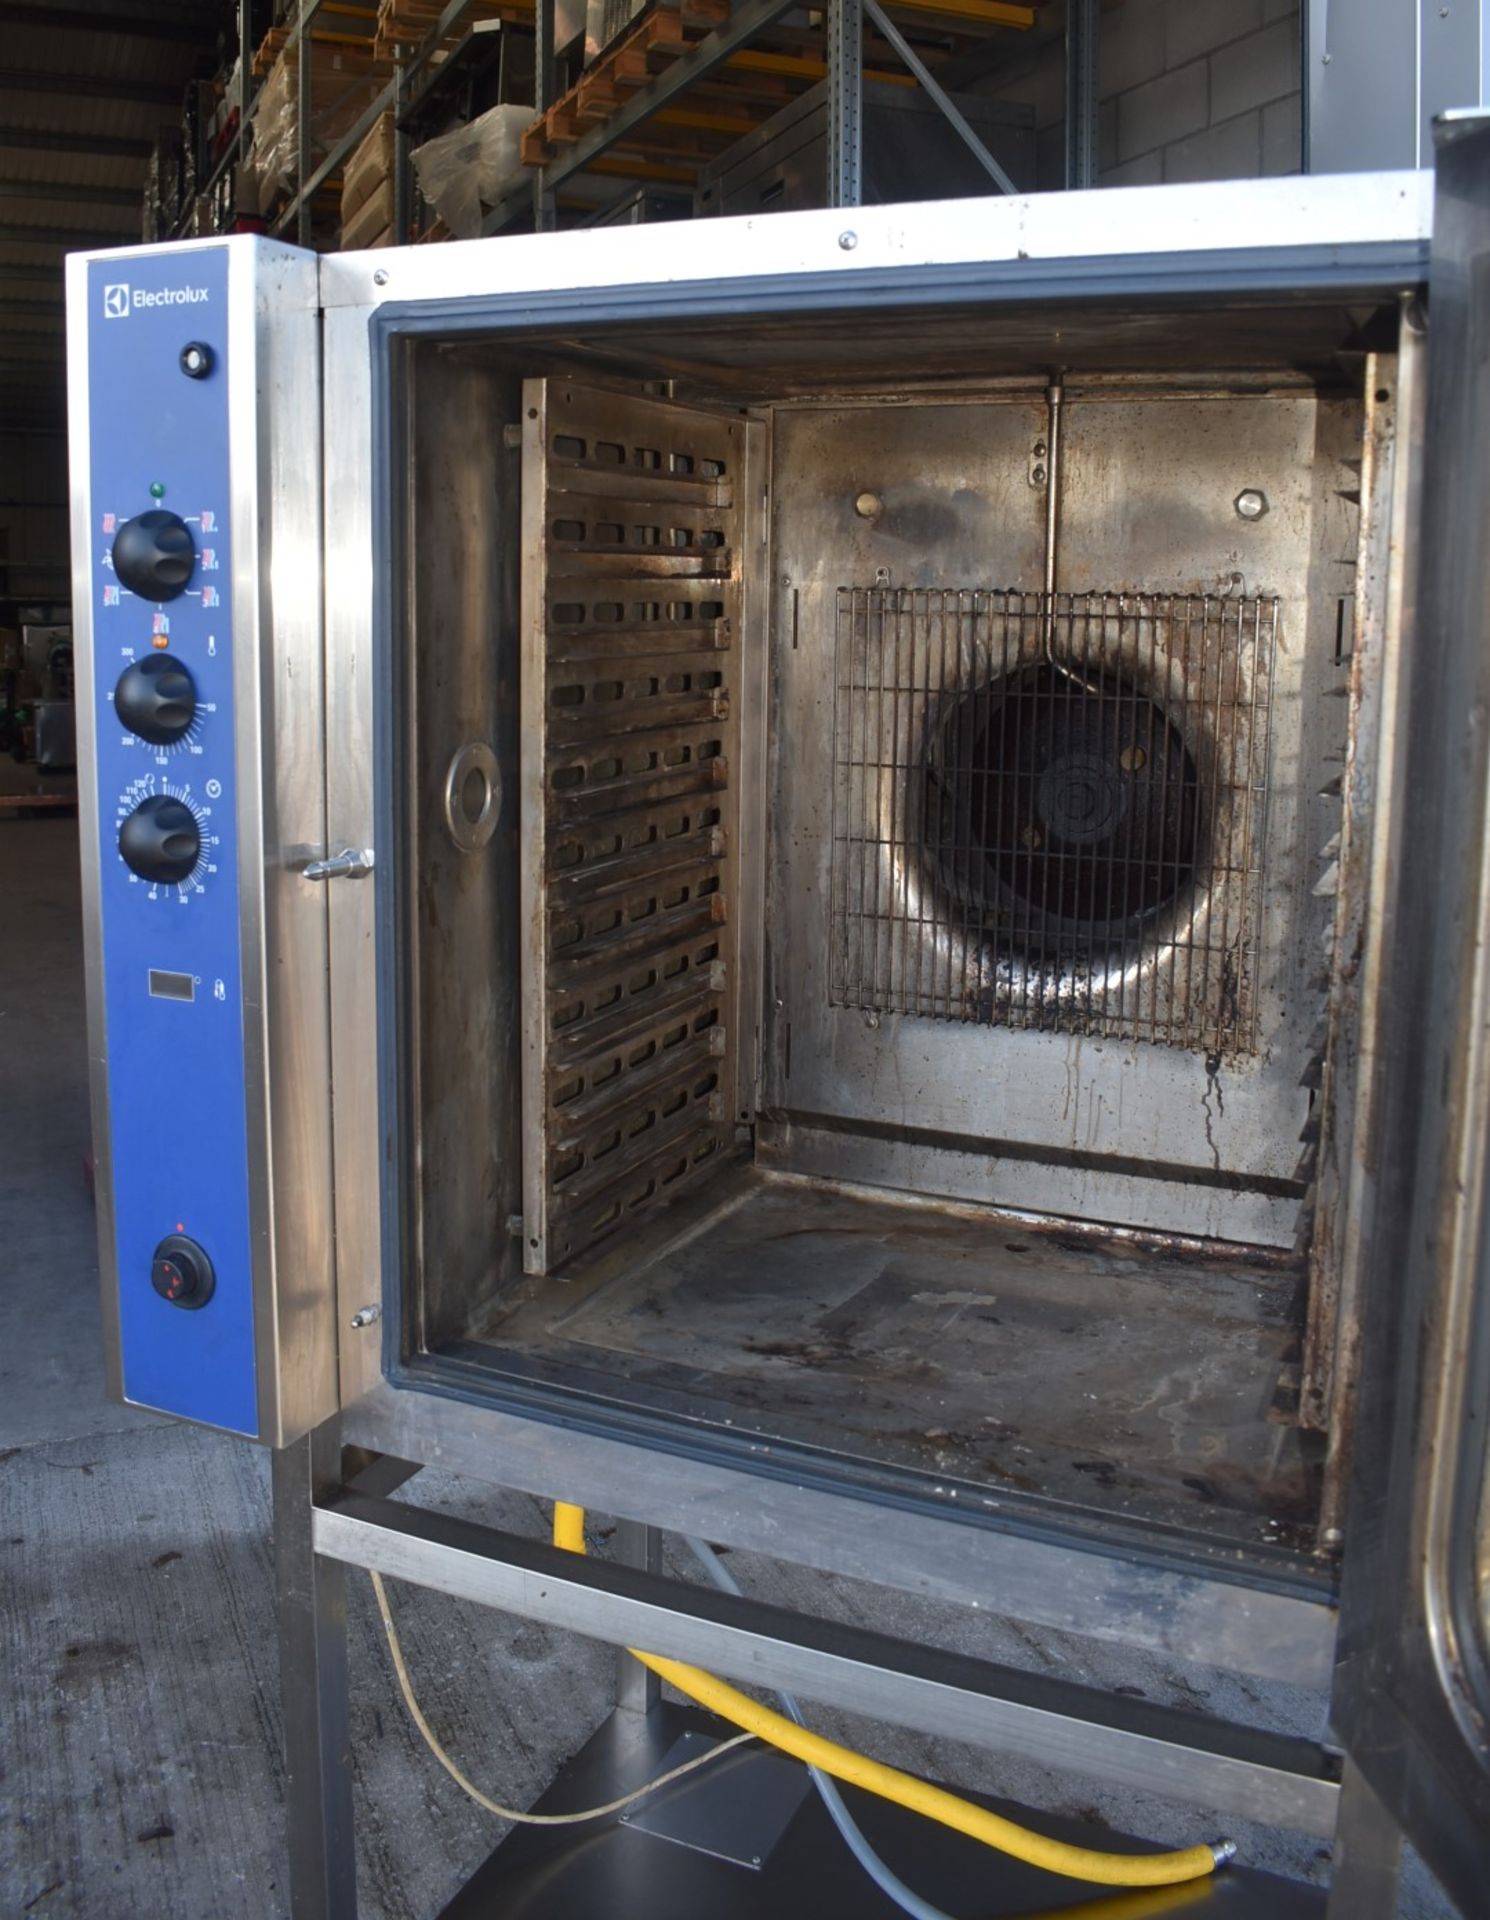 1 x Electrolux 10 Grid Convection Oven With Stand - 2020 Model - Type: ECFG101-0 - RRP £6,500 - Image 12 of 13